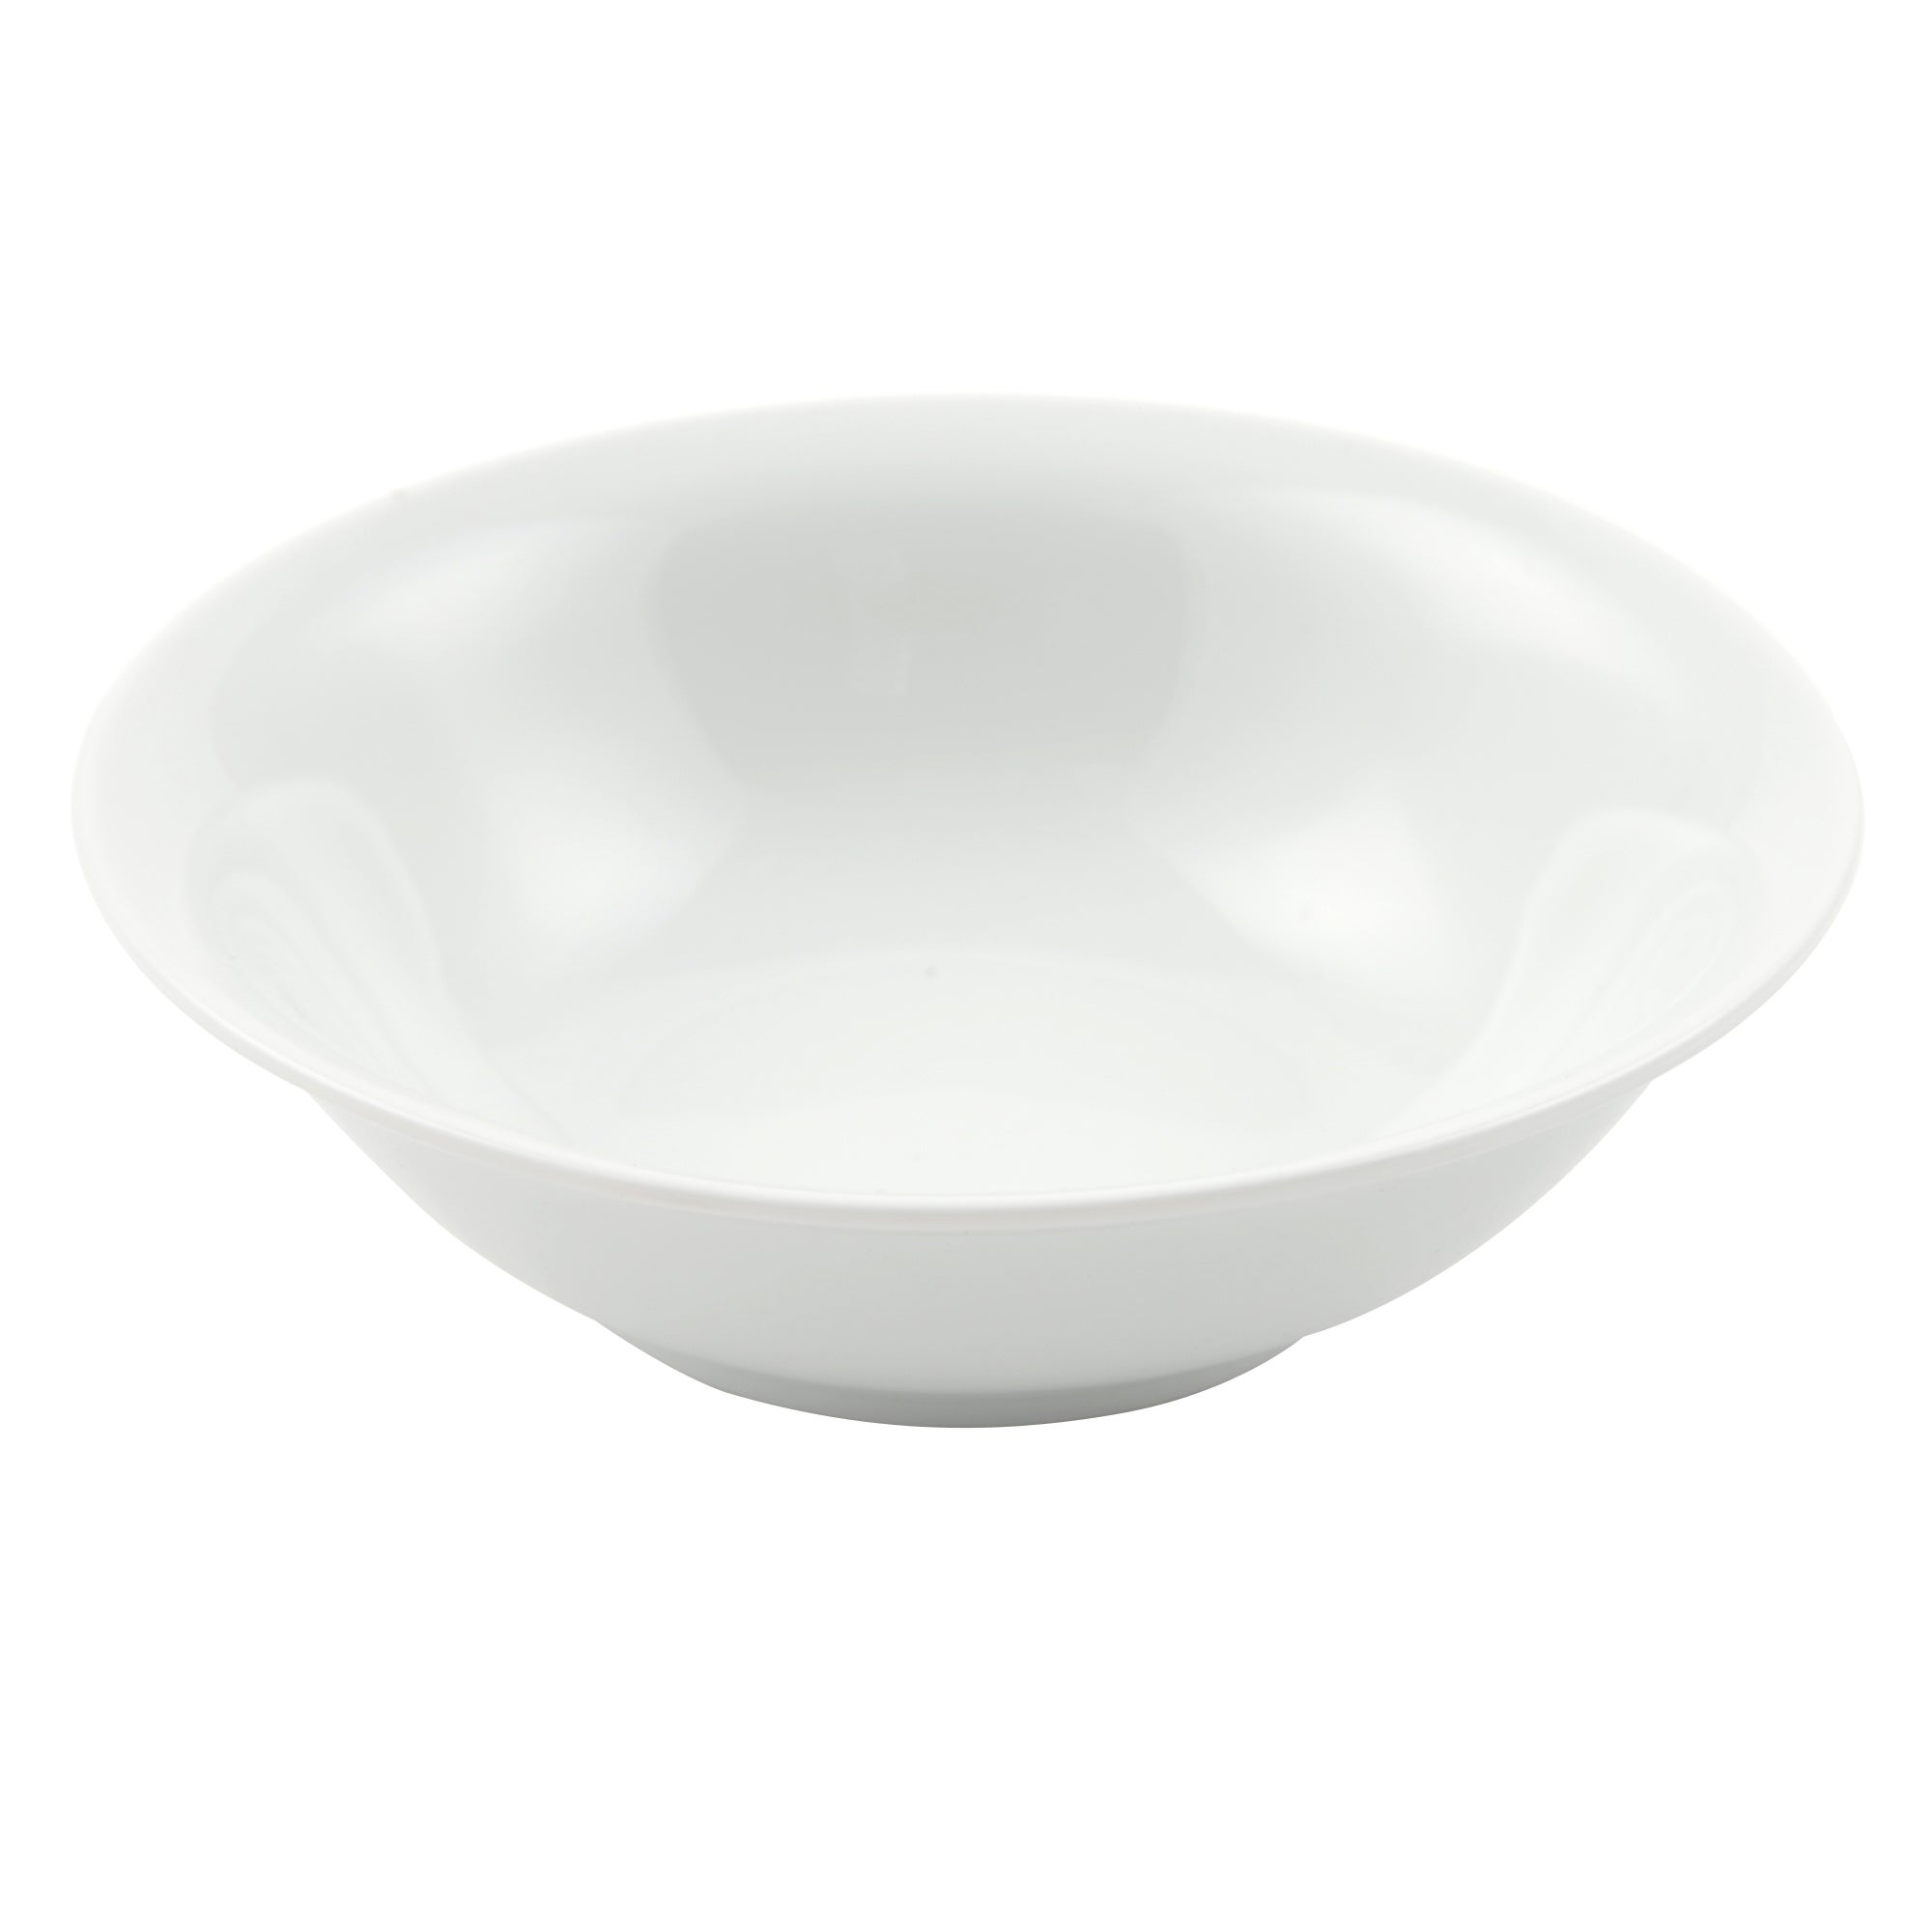 Purity Porcelain Cereal Bowl White